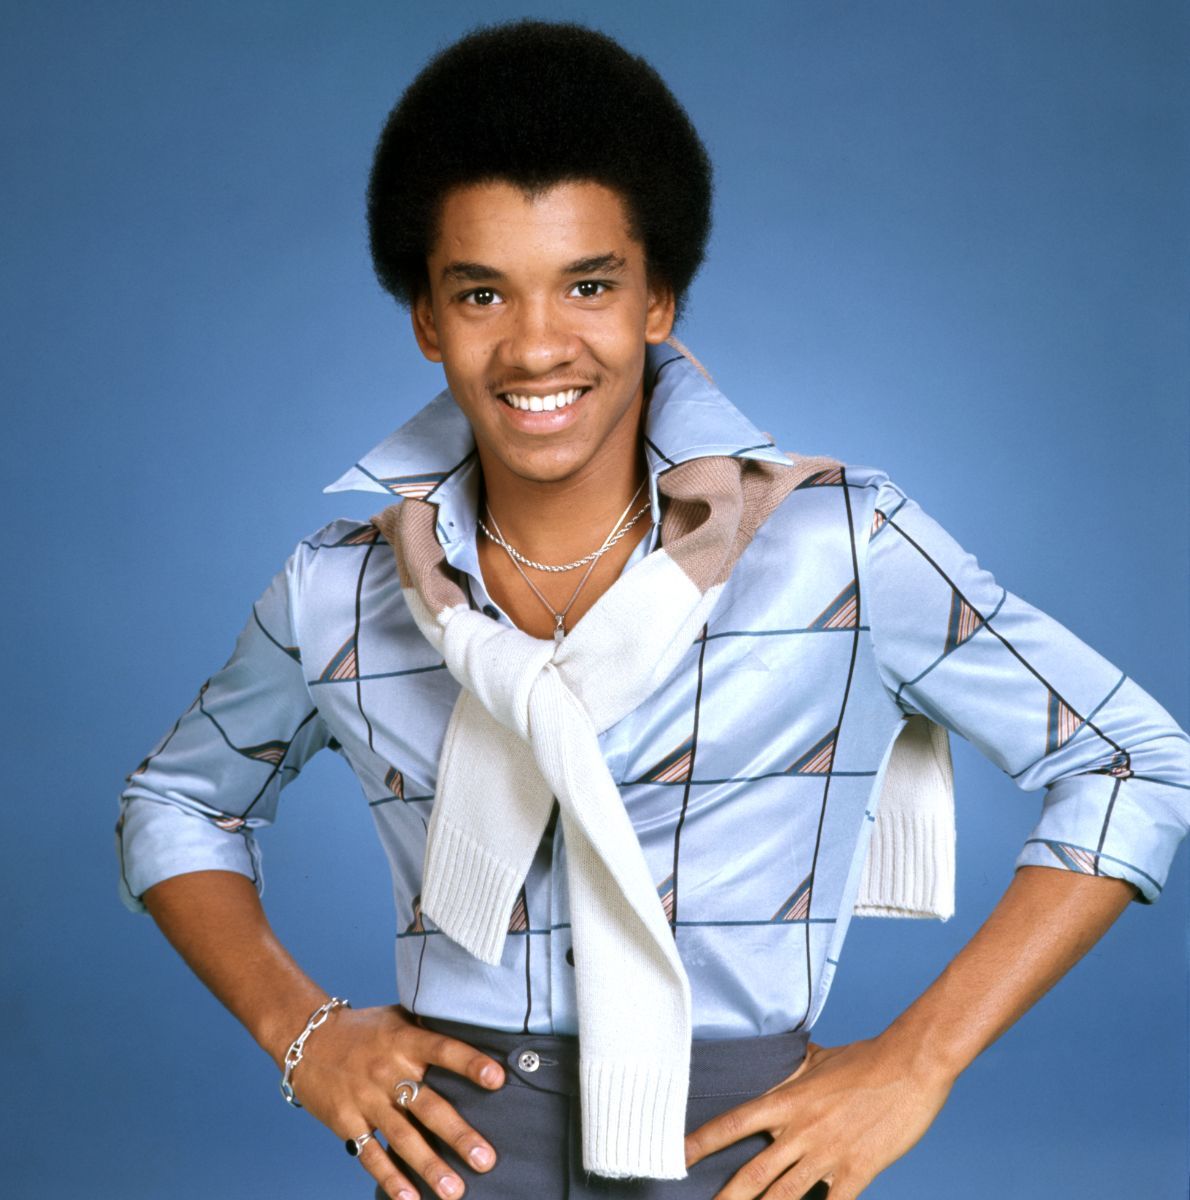 how old is michael from good times